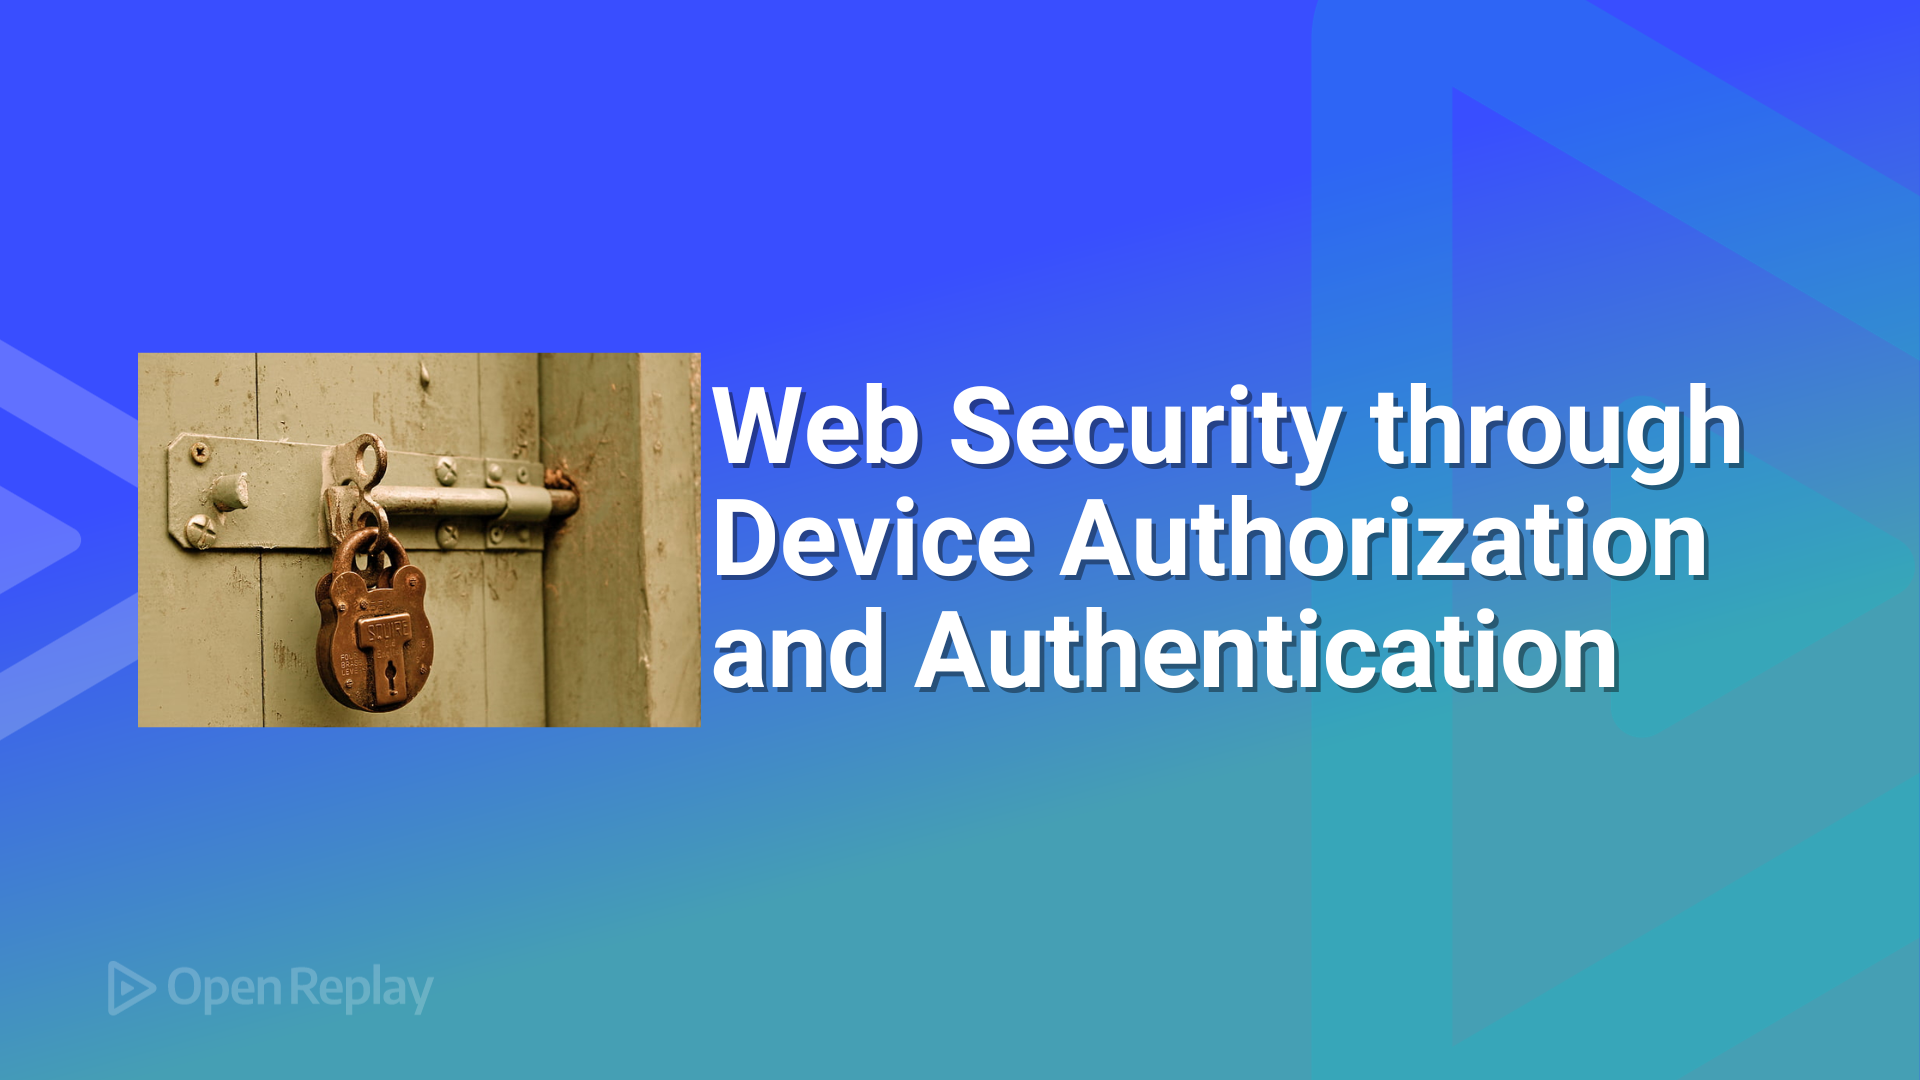 Web Security through Device Authorization and Authentication